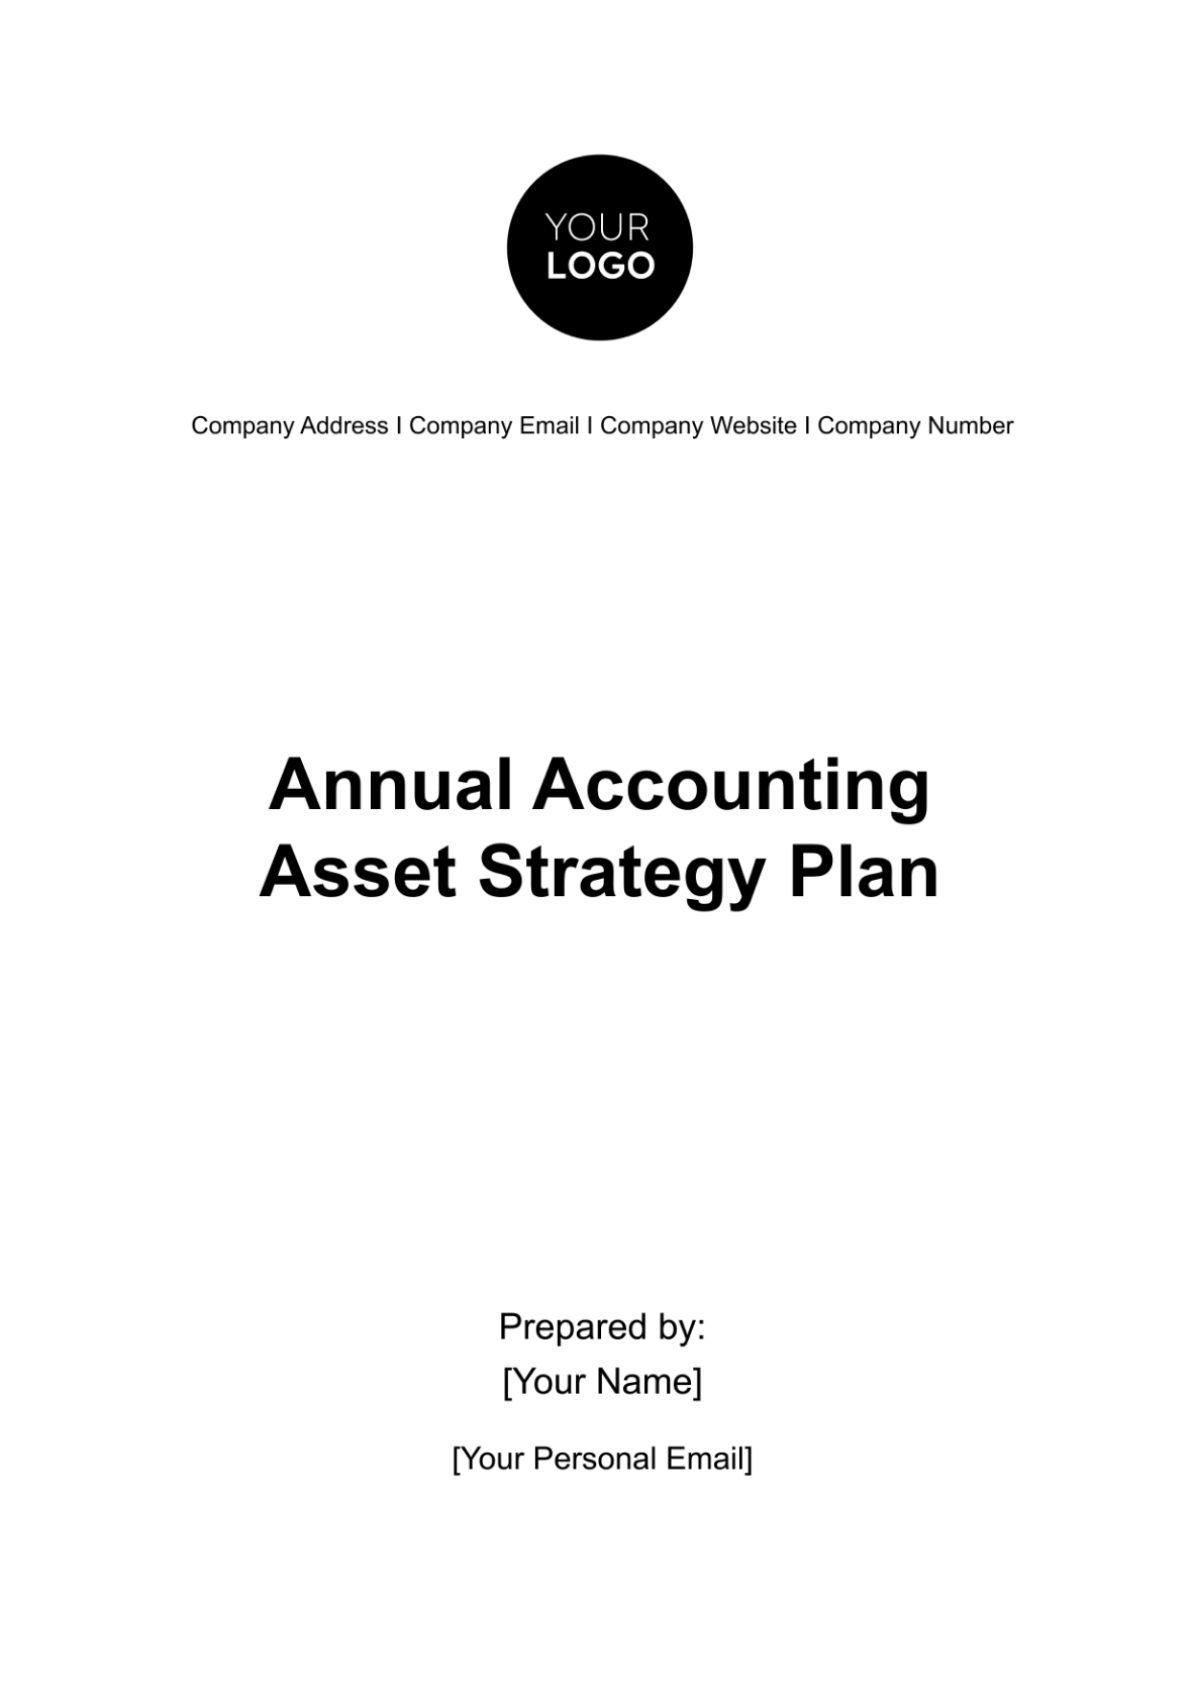 Annual Accounting Asset Strategy Plan Template